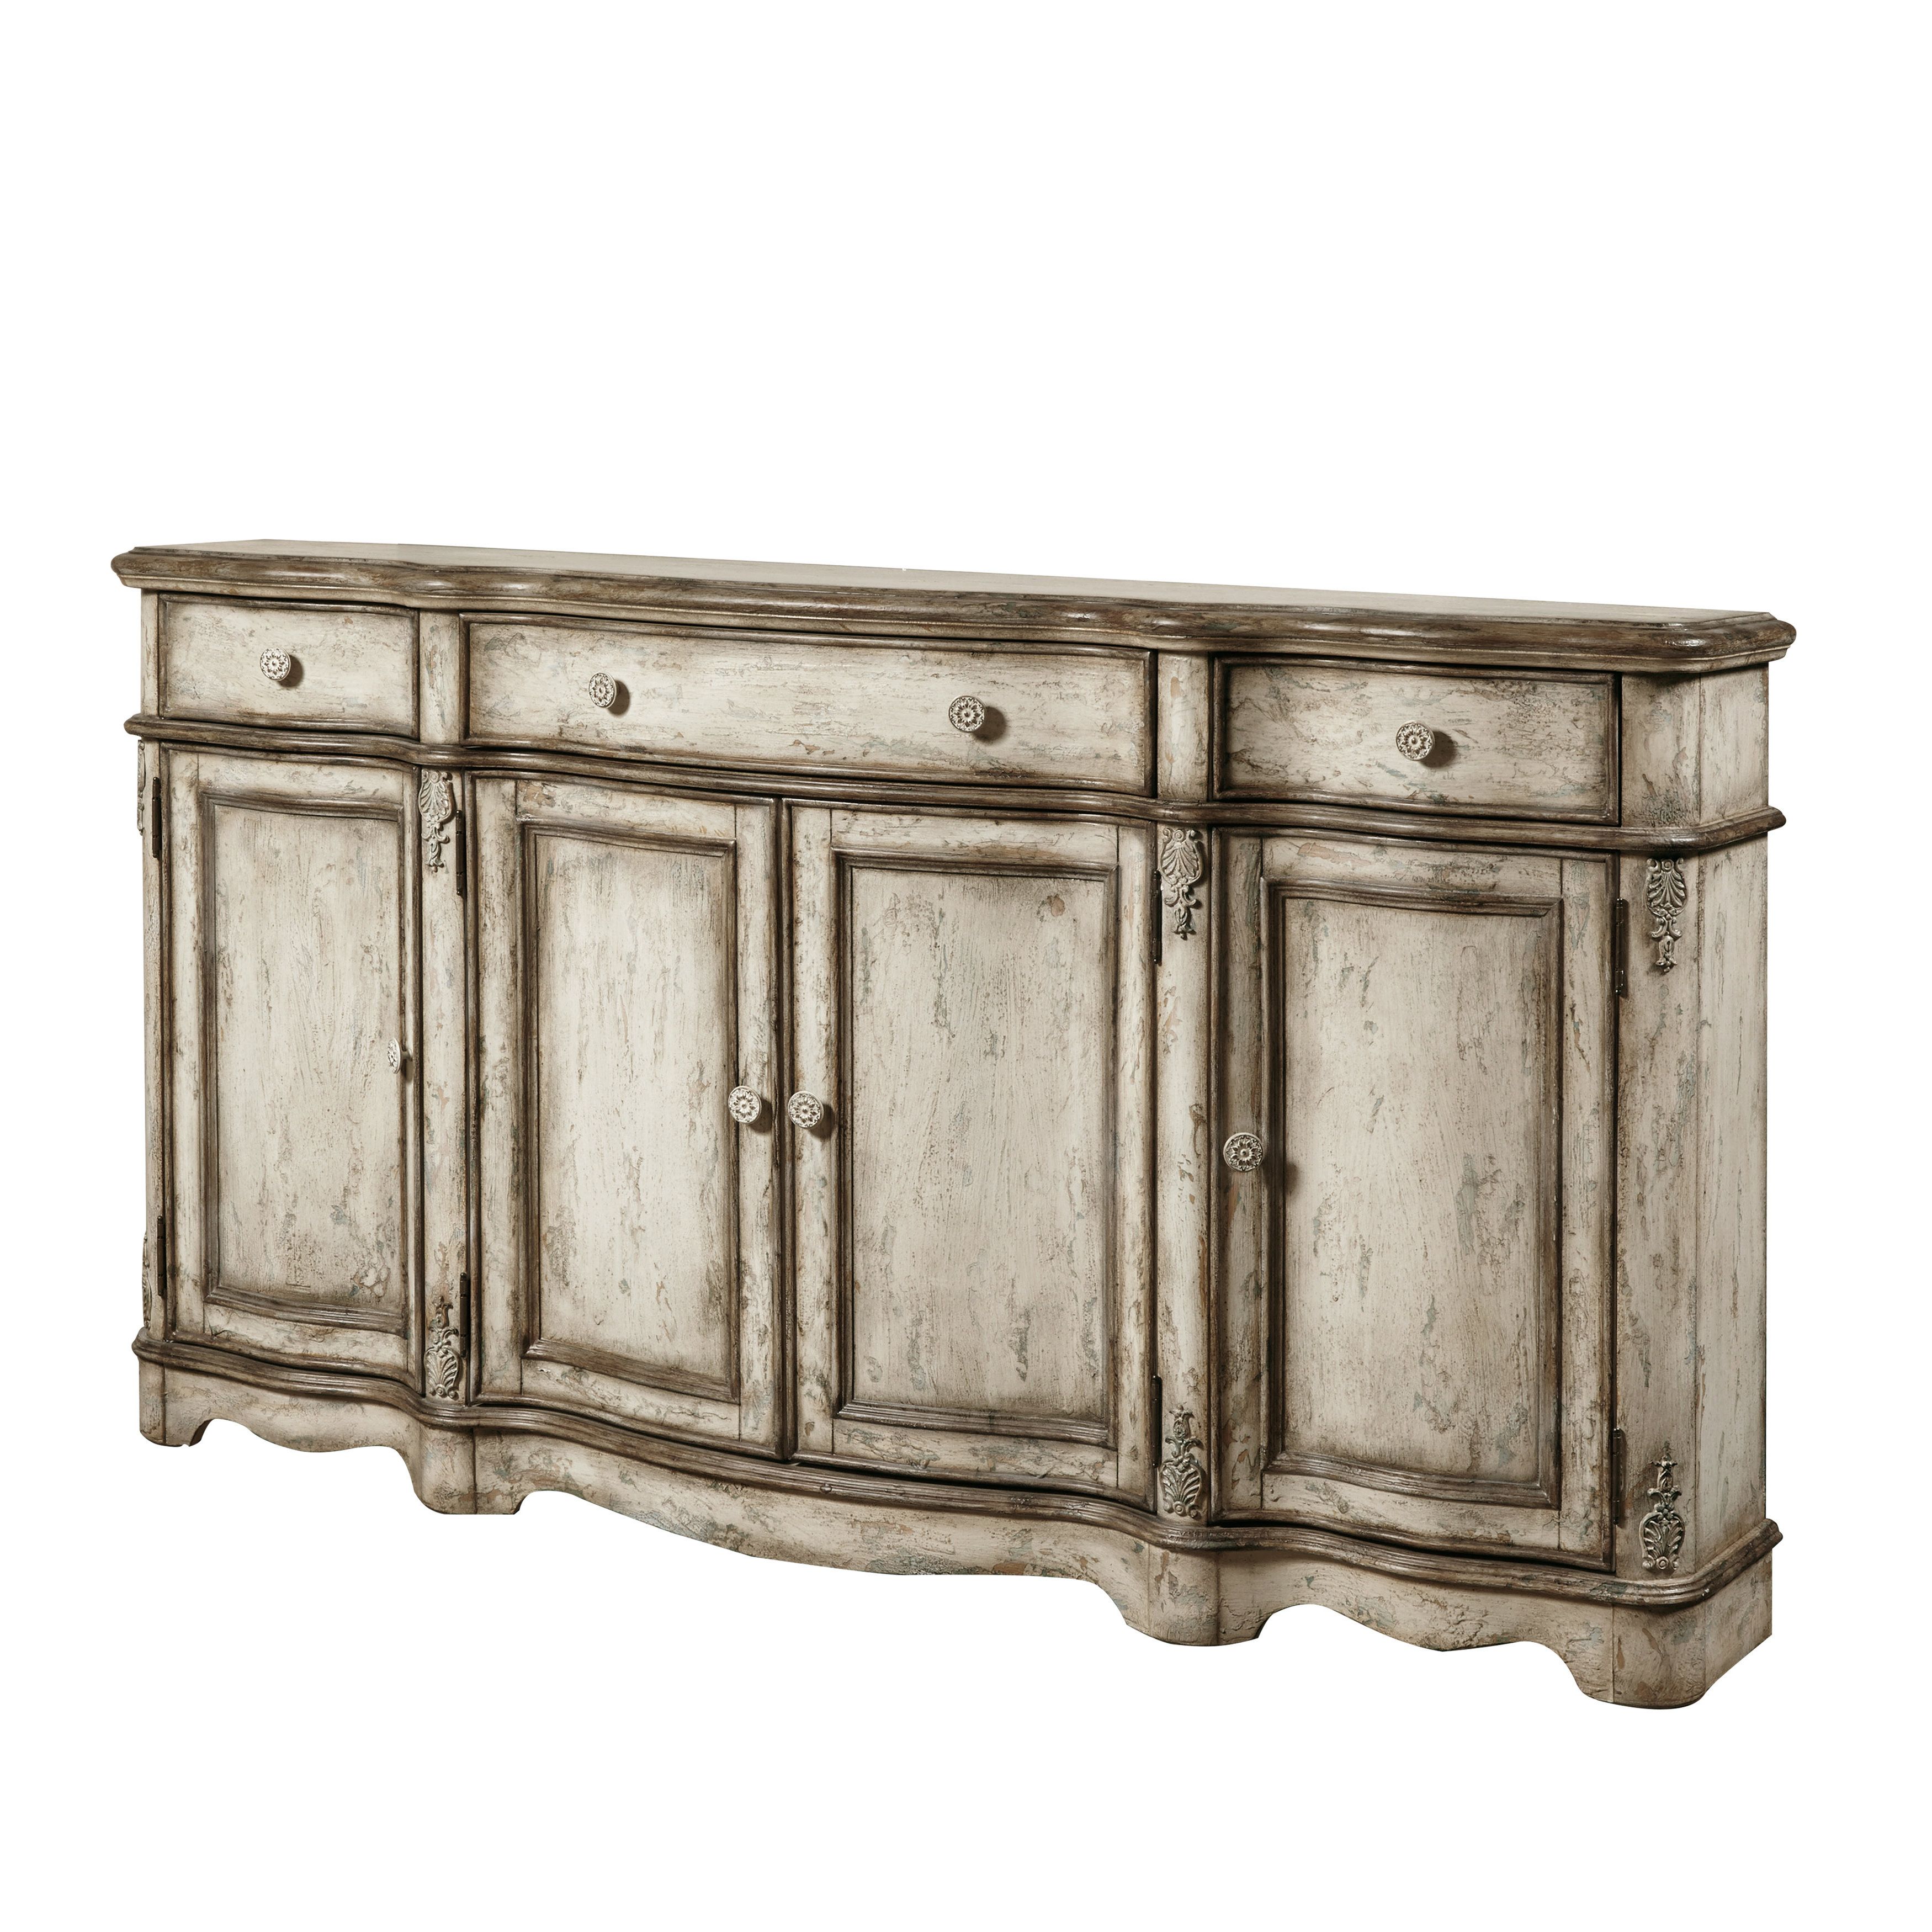 Farmhouse & Rustic Sideboards & Buffets | Birch Lane Pertaining To Best And Newest Rosson Sideboards (View 14 of 20)